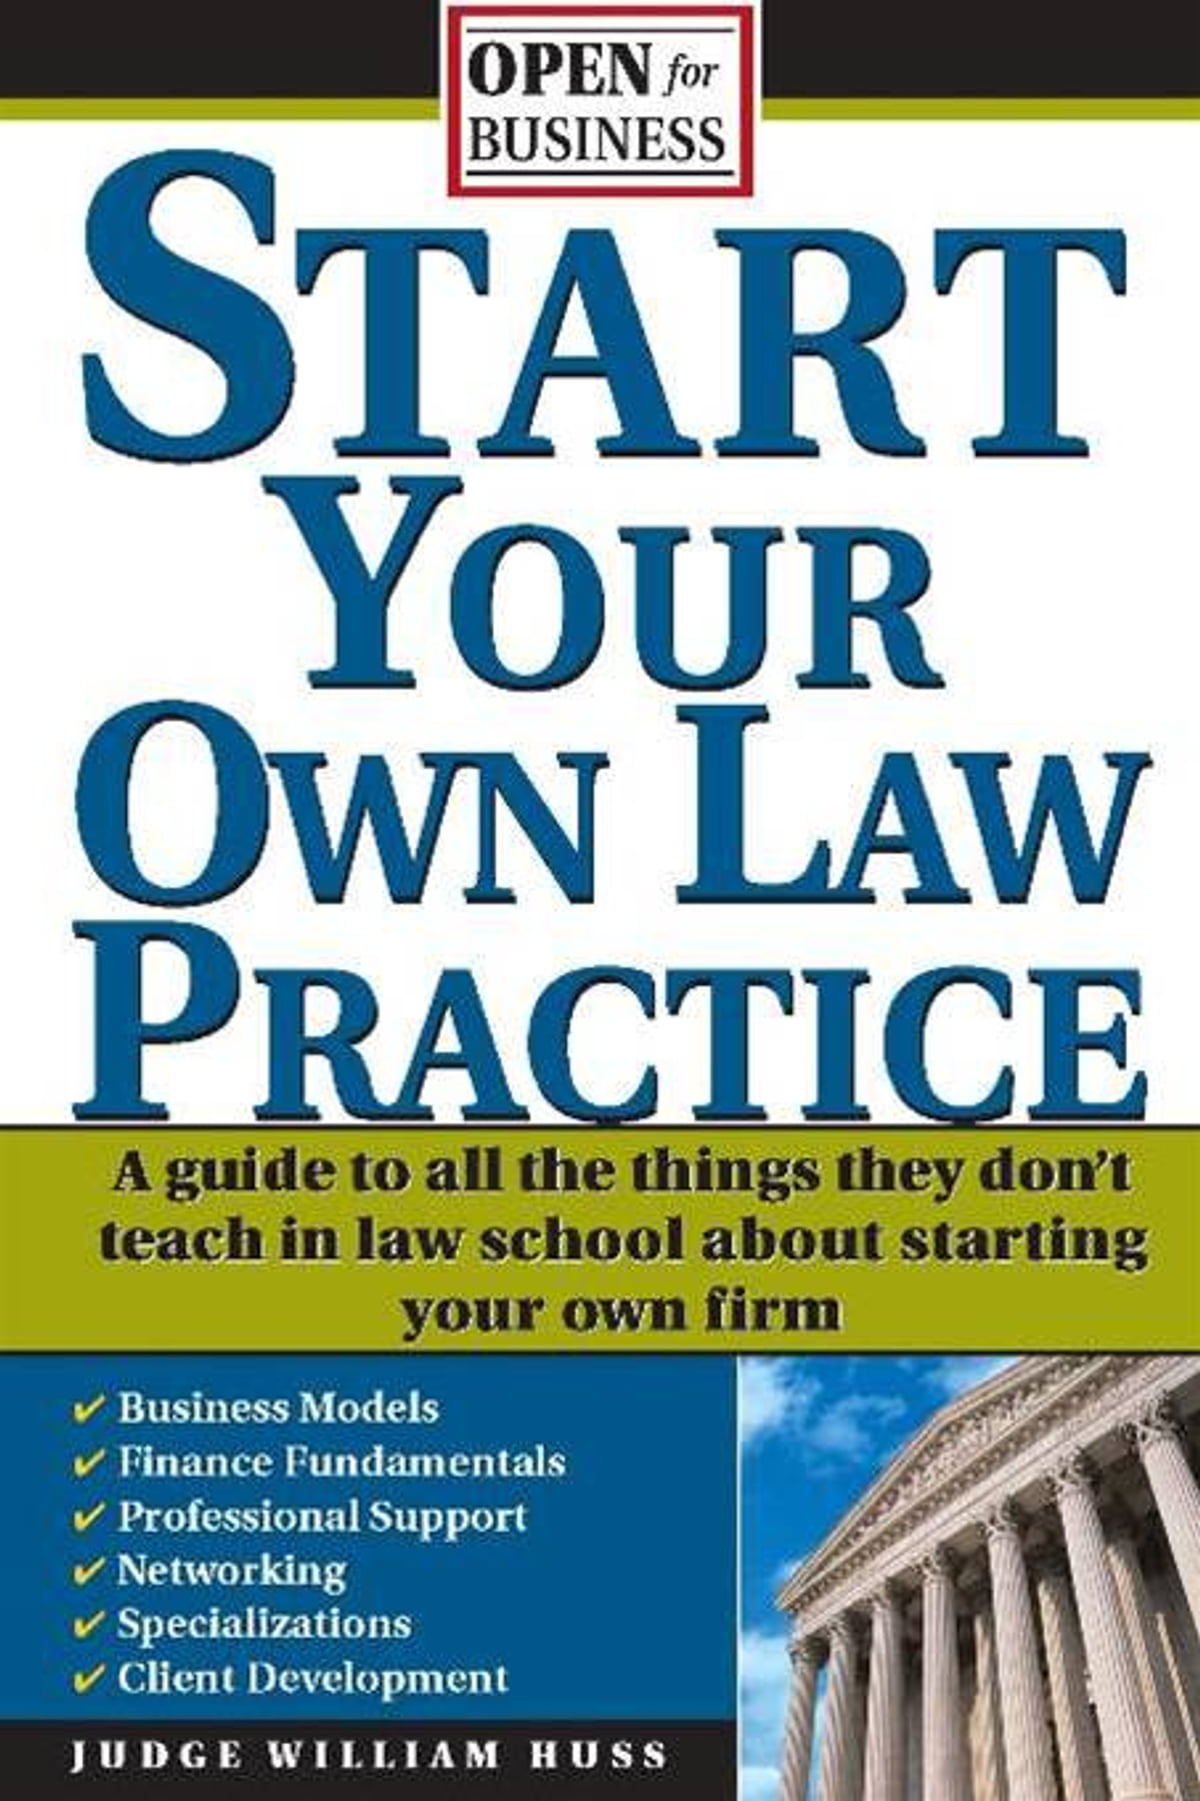 How To Start Your Own Law Firm